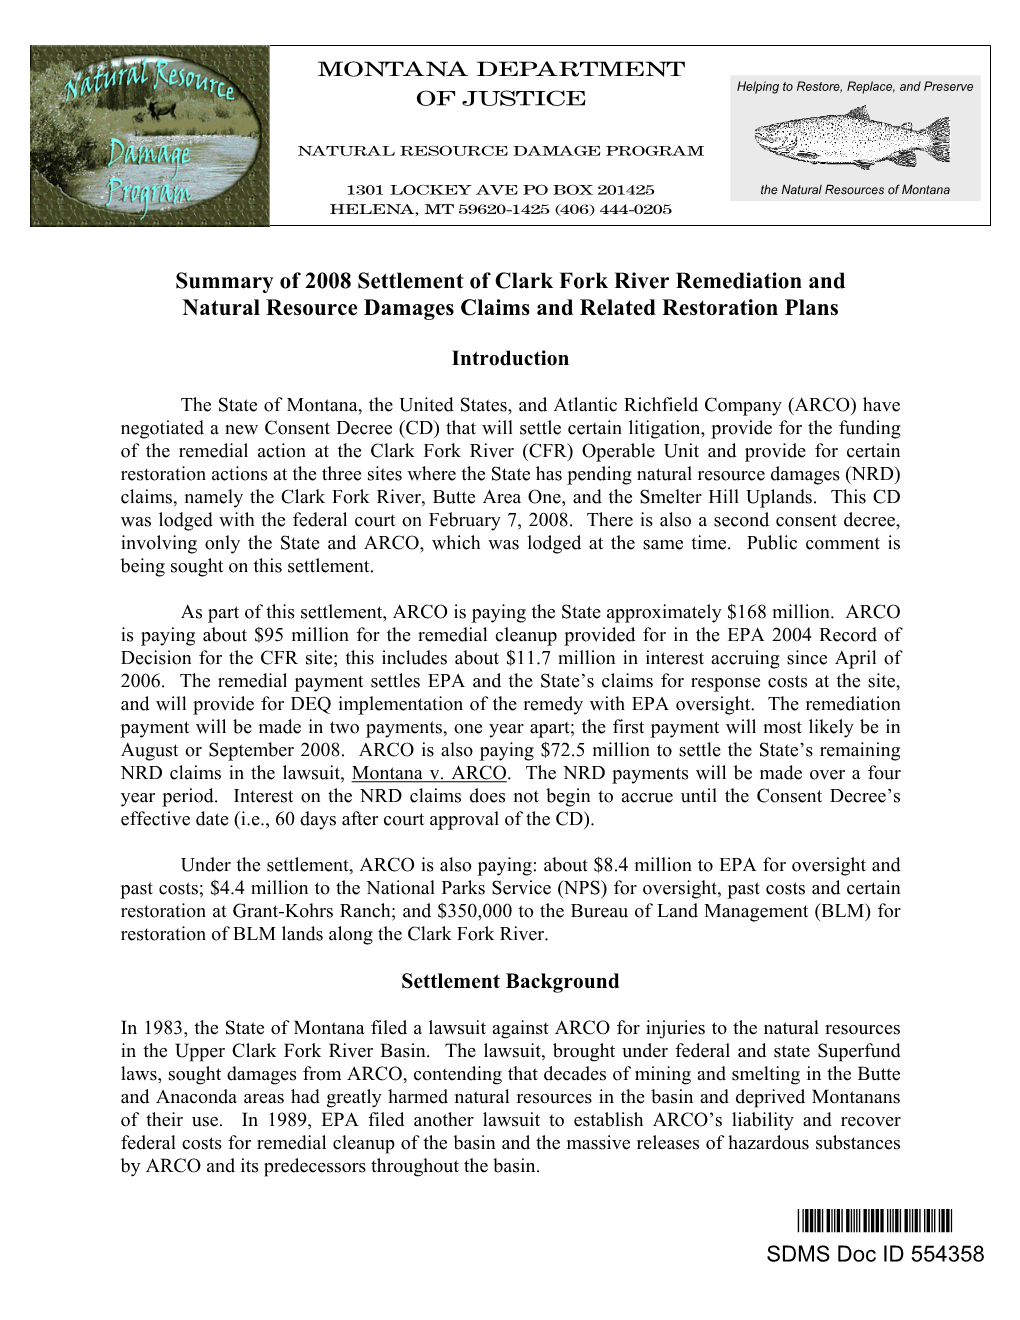 Summary of 2008 Settlement of Clark Fork River Remediation and Natural Resource Damages Claims and Related Restoration Plans